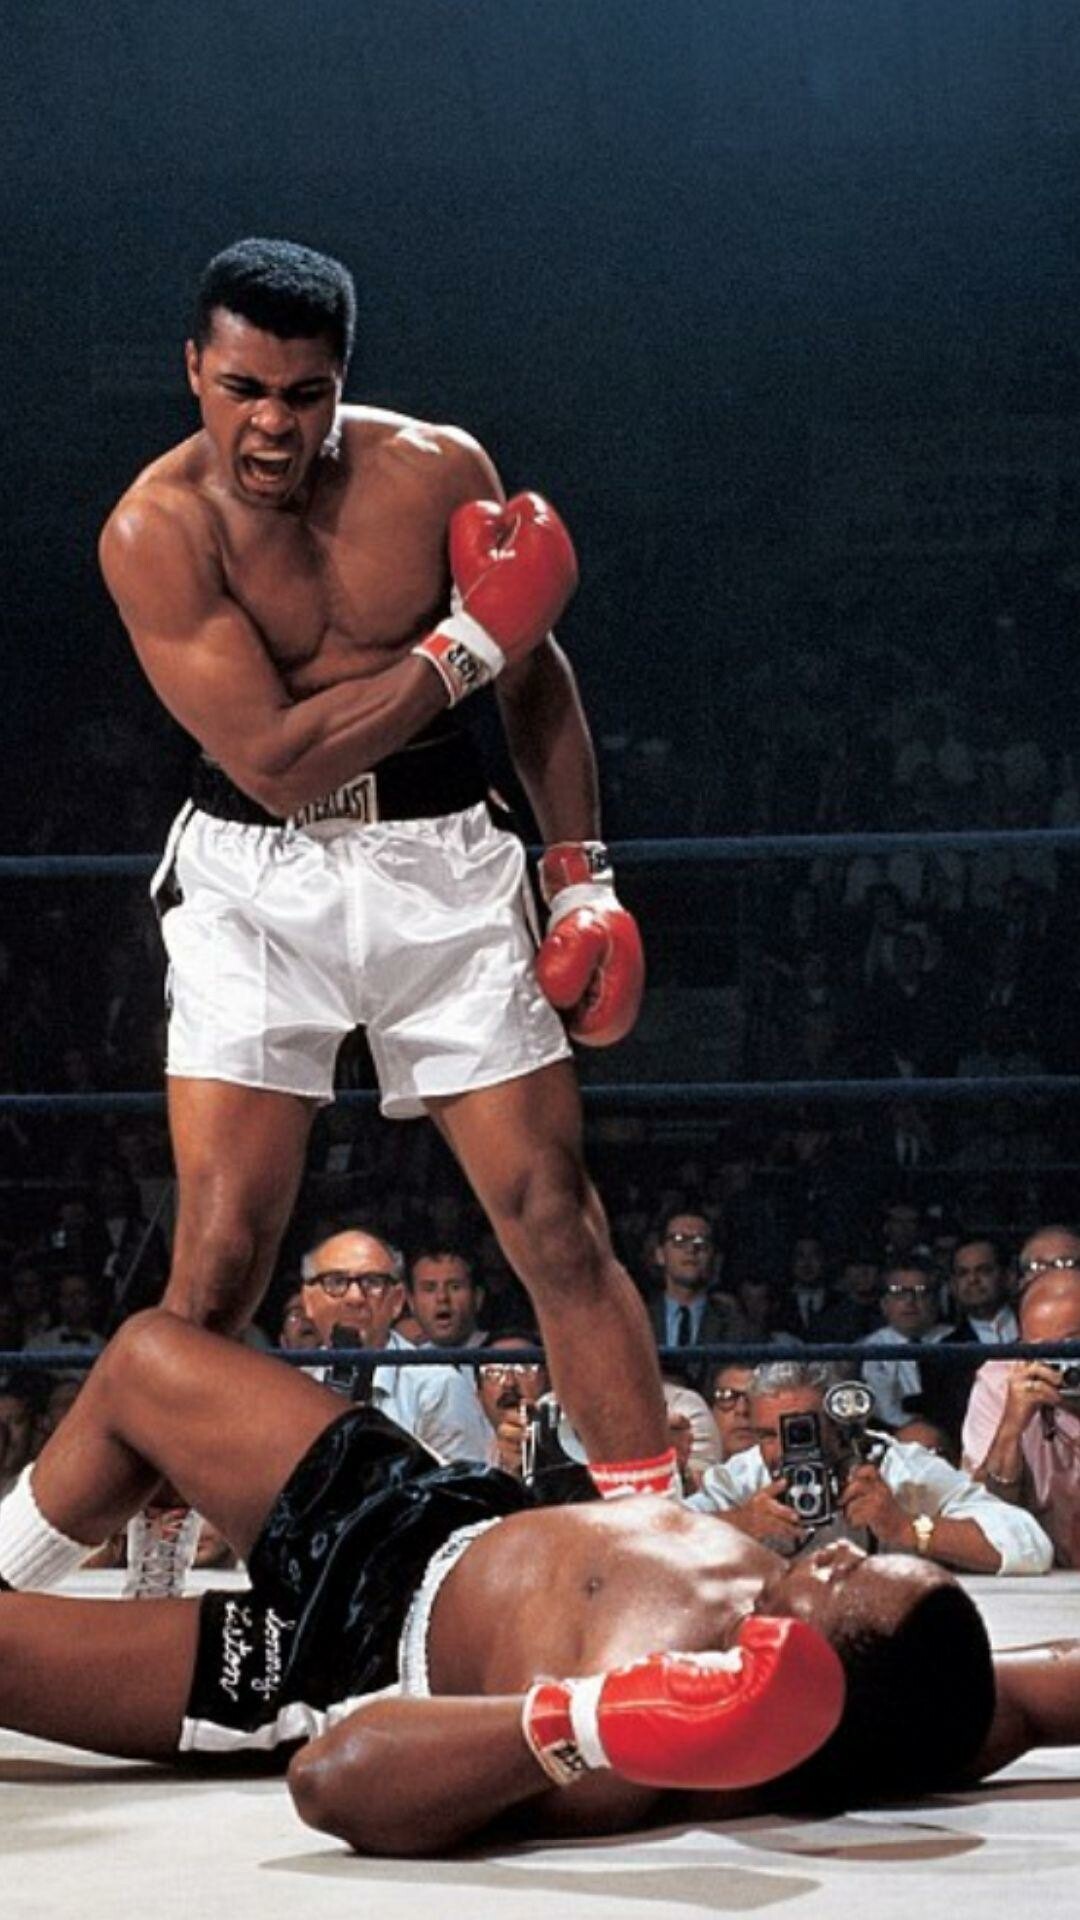 Muhammad Ali: He defended his title against Sonny Liston on May 25, 1965, in Lewiston, Maine. 1080x1920 Full HD Wallpaper.